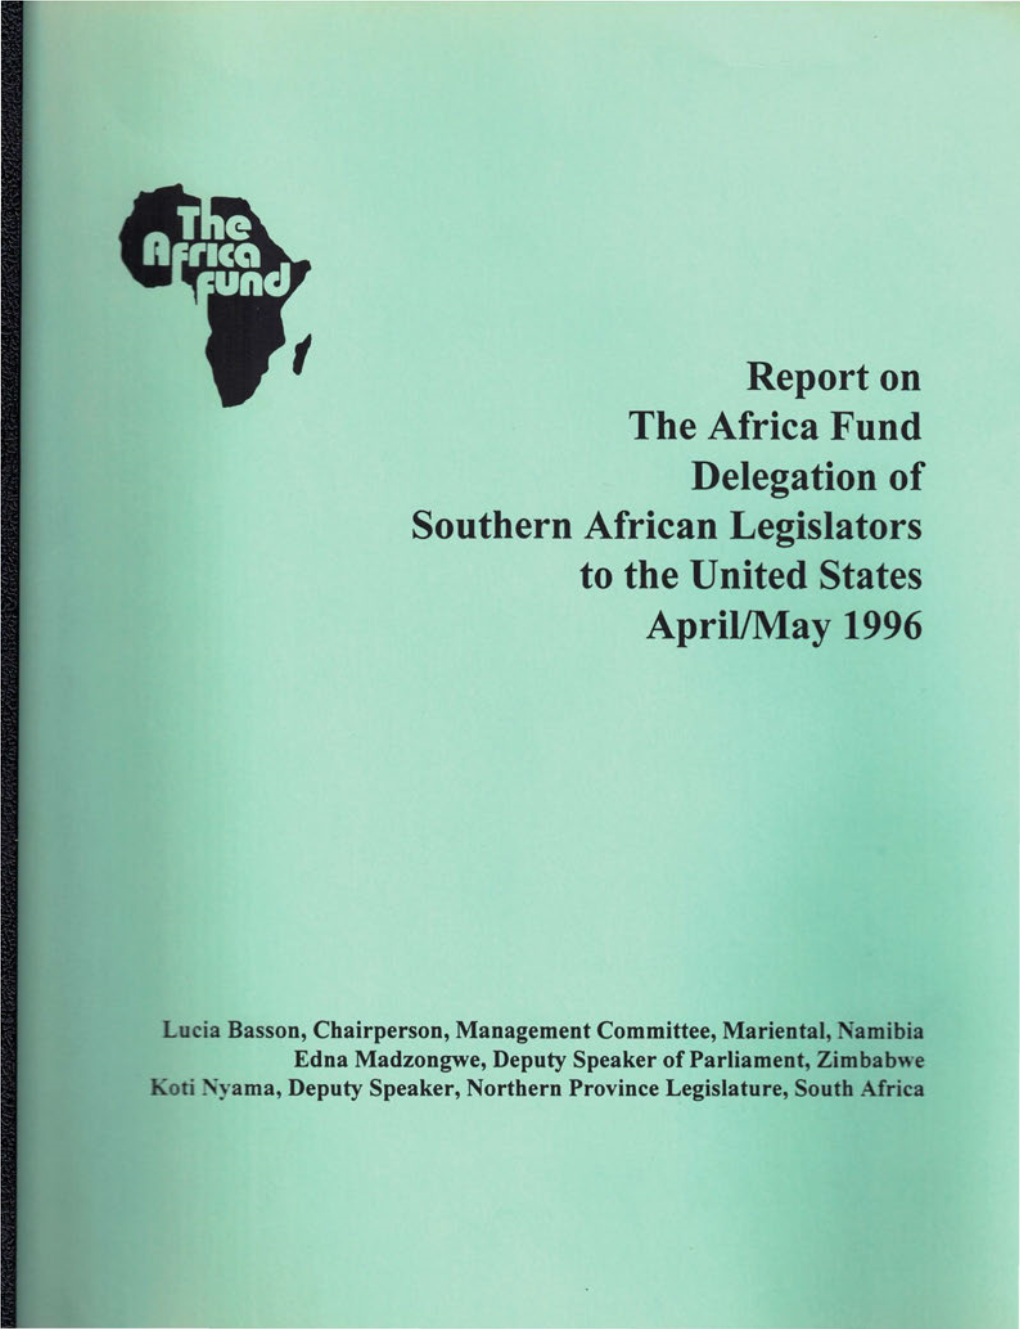 Report on the Africa Fund Delegation of Southern African Legislators to the United States April/May 1996